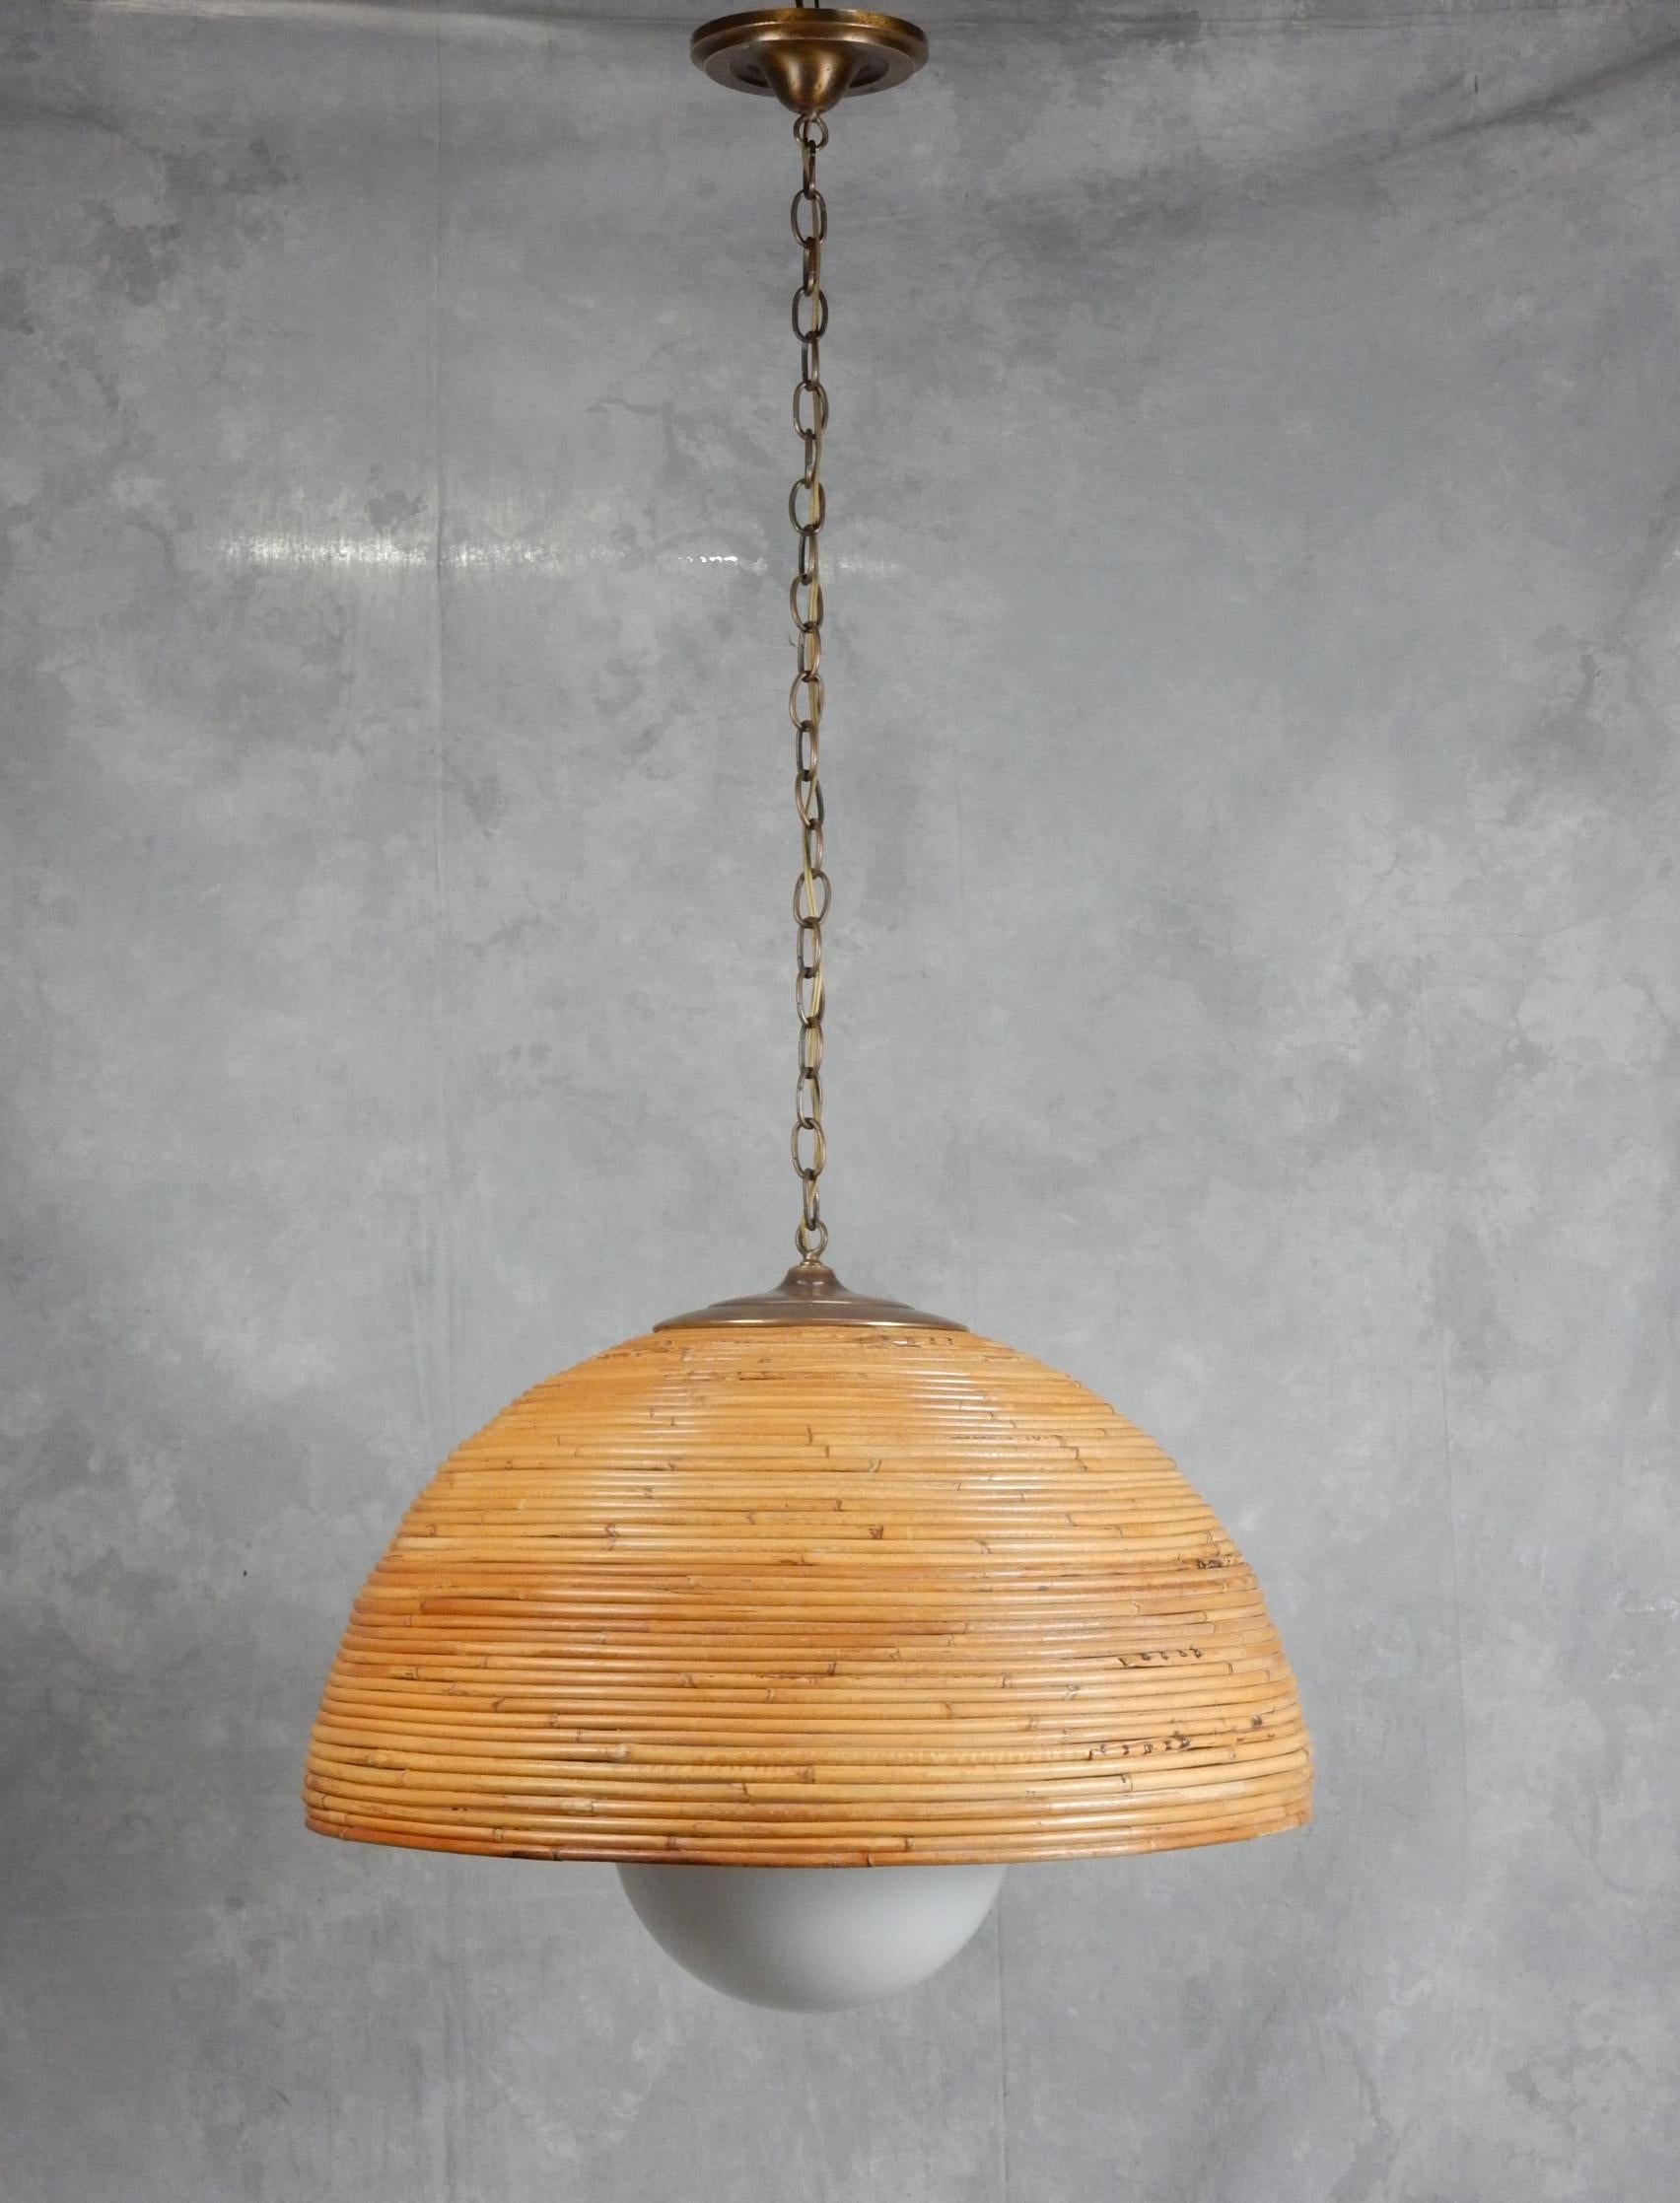 Large pencil reed dome shade pendant lamp from the 1960's.
Gorgeous aged brass hardware. Warm aged patina on reed .
10